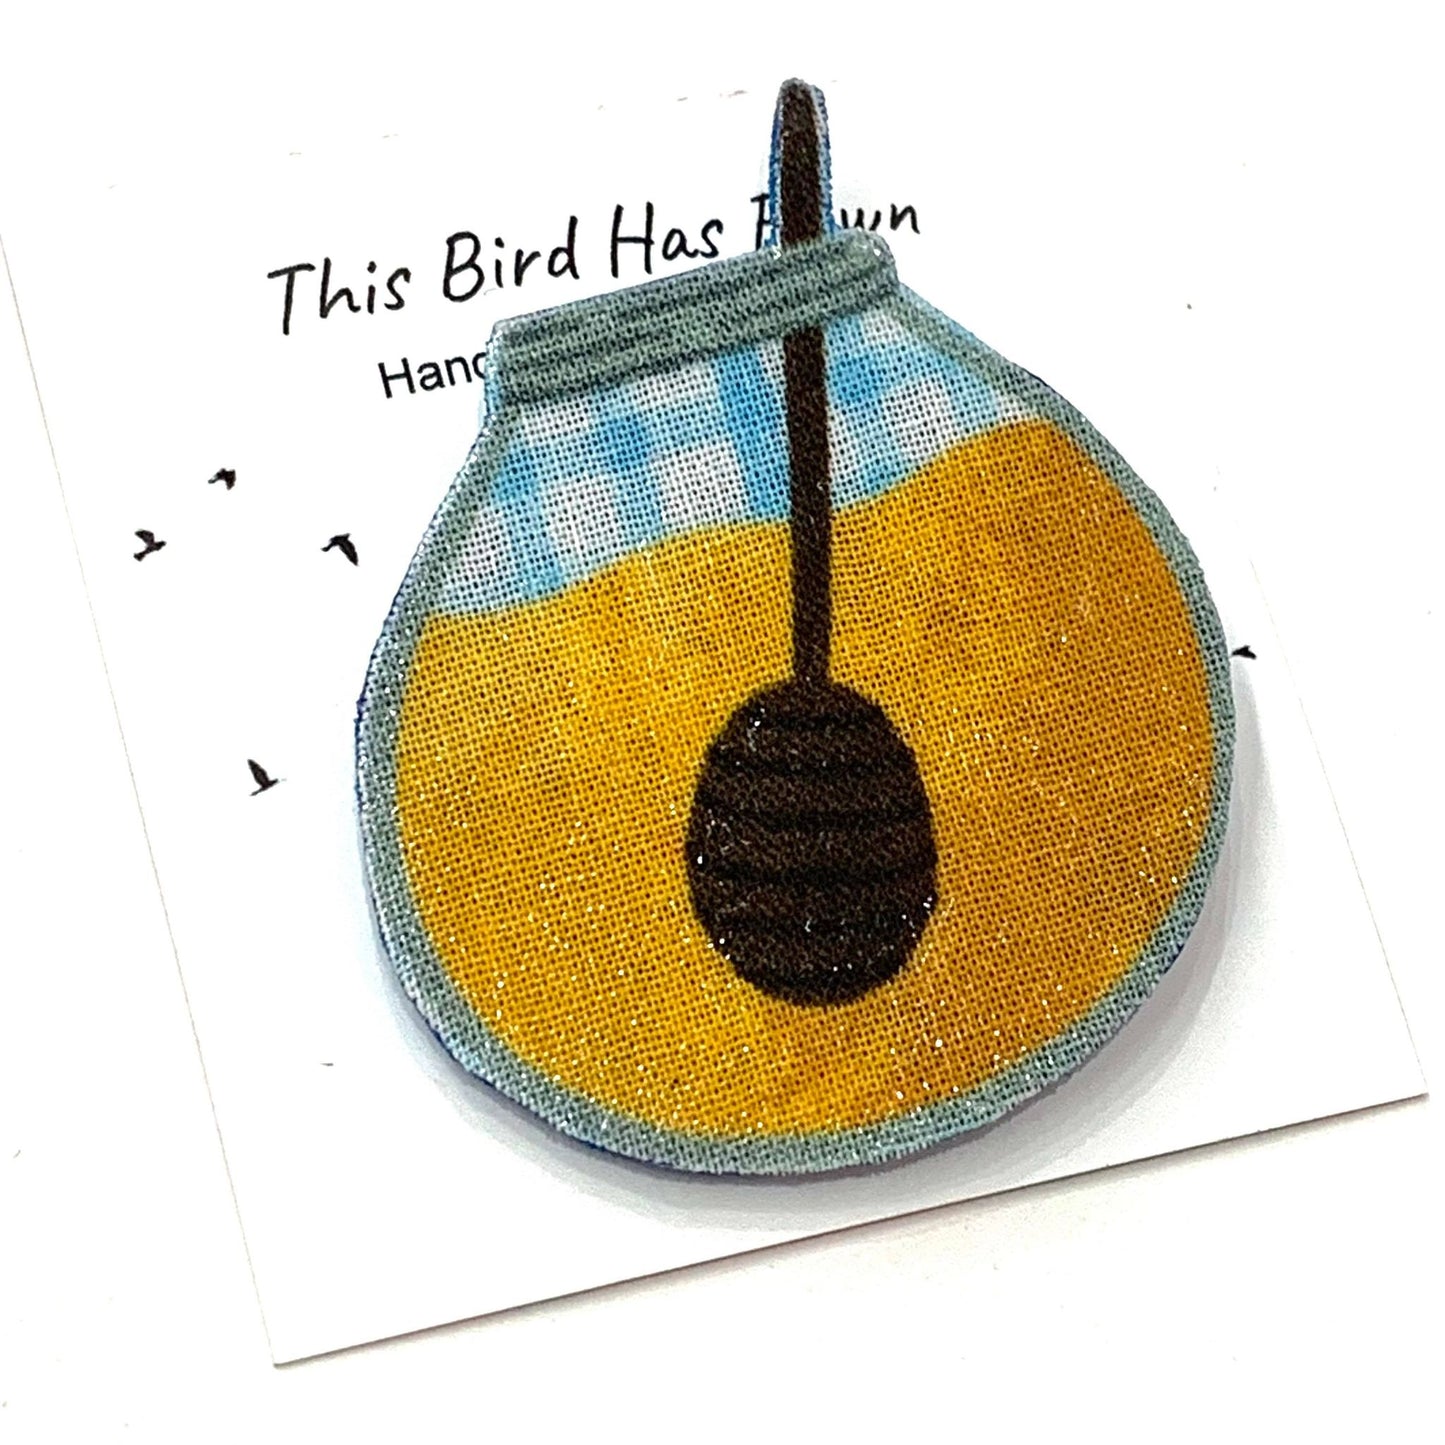 THIS BIRD HAS FLOWN- "Pickles & Preserves" Remnant Brooches- Honey Jar